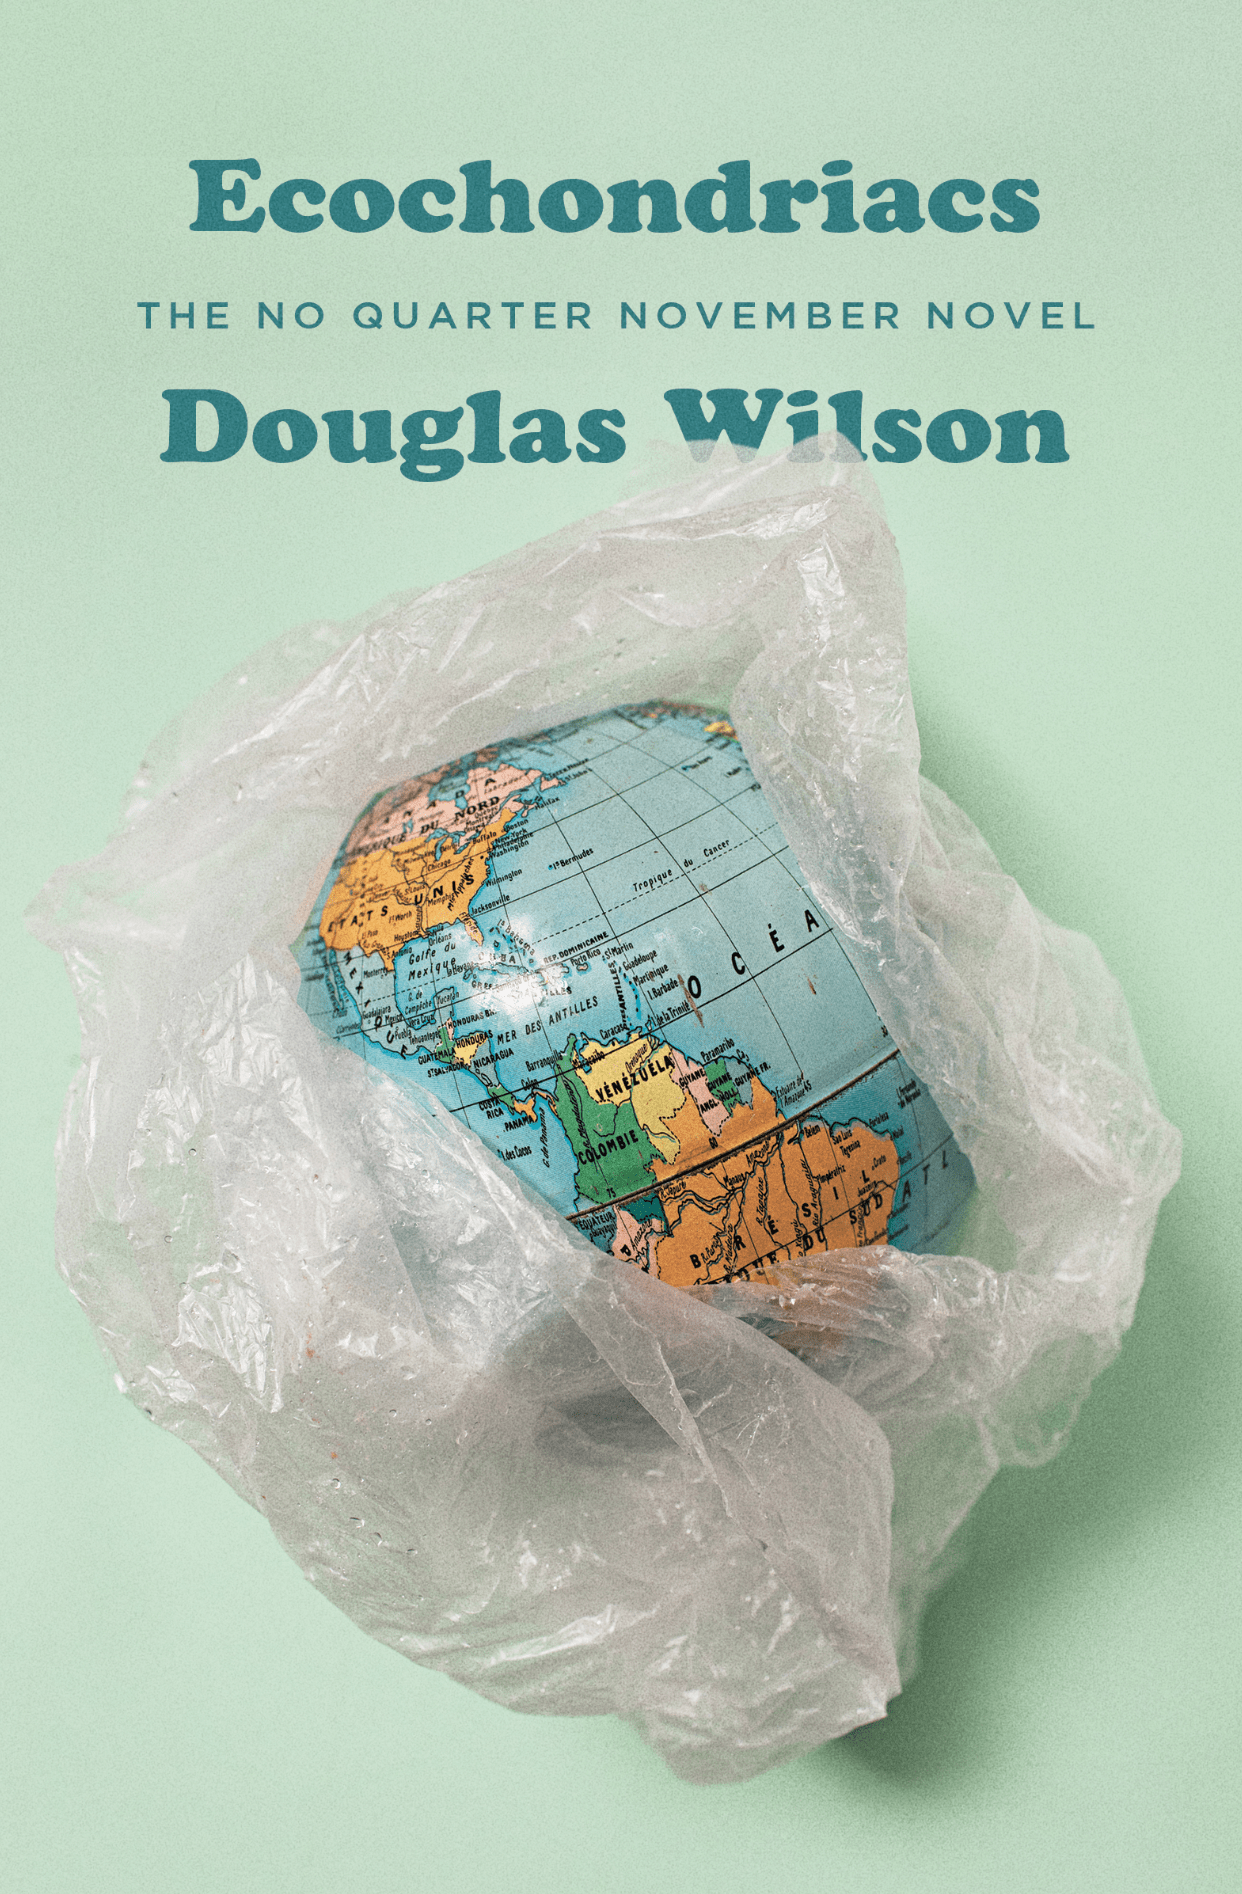 Ecochondriacs: The No Quarter November Novel by Douglas Wilson. The picture shows the globe in plastic wrap, as though the idea of global warming were a package that the public could buy.